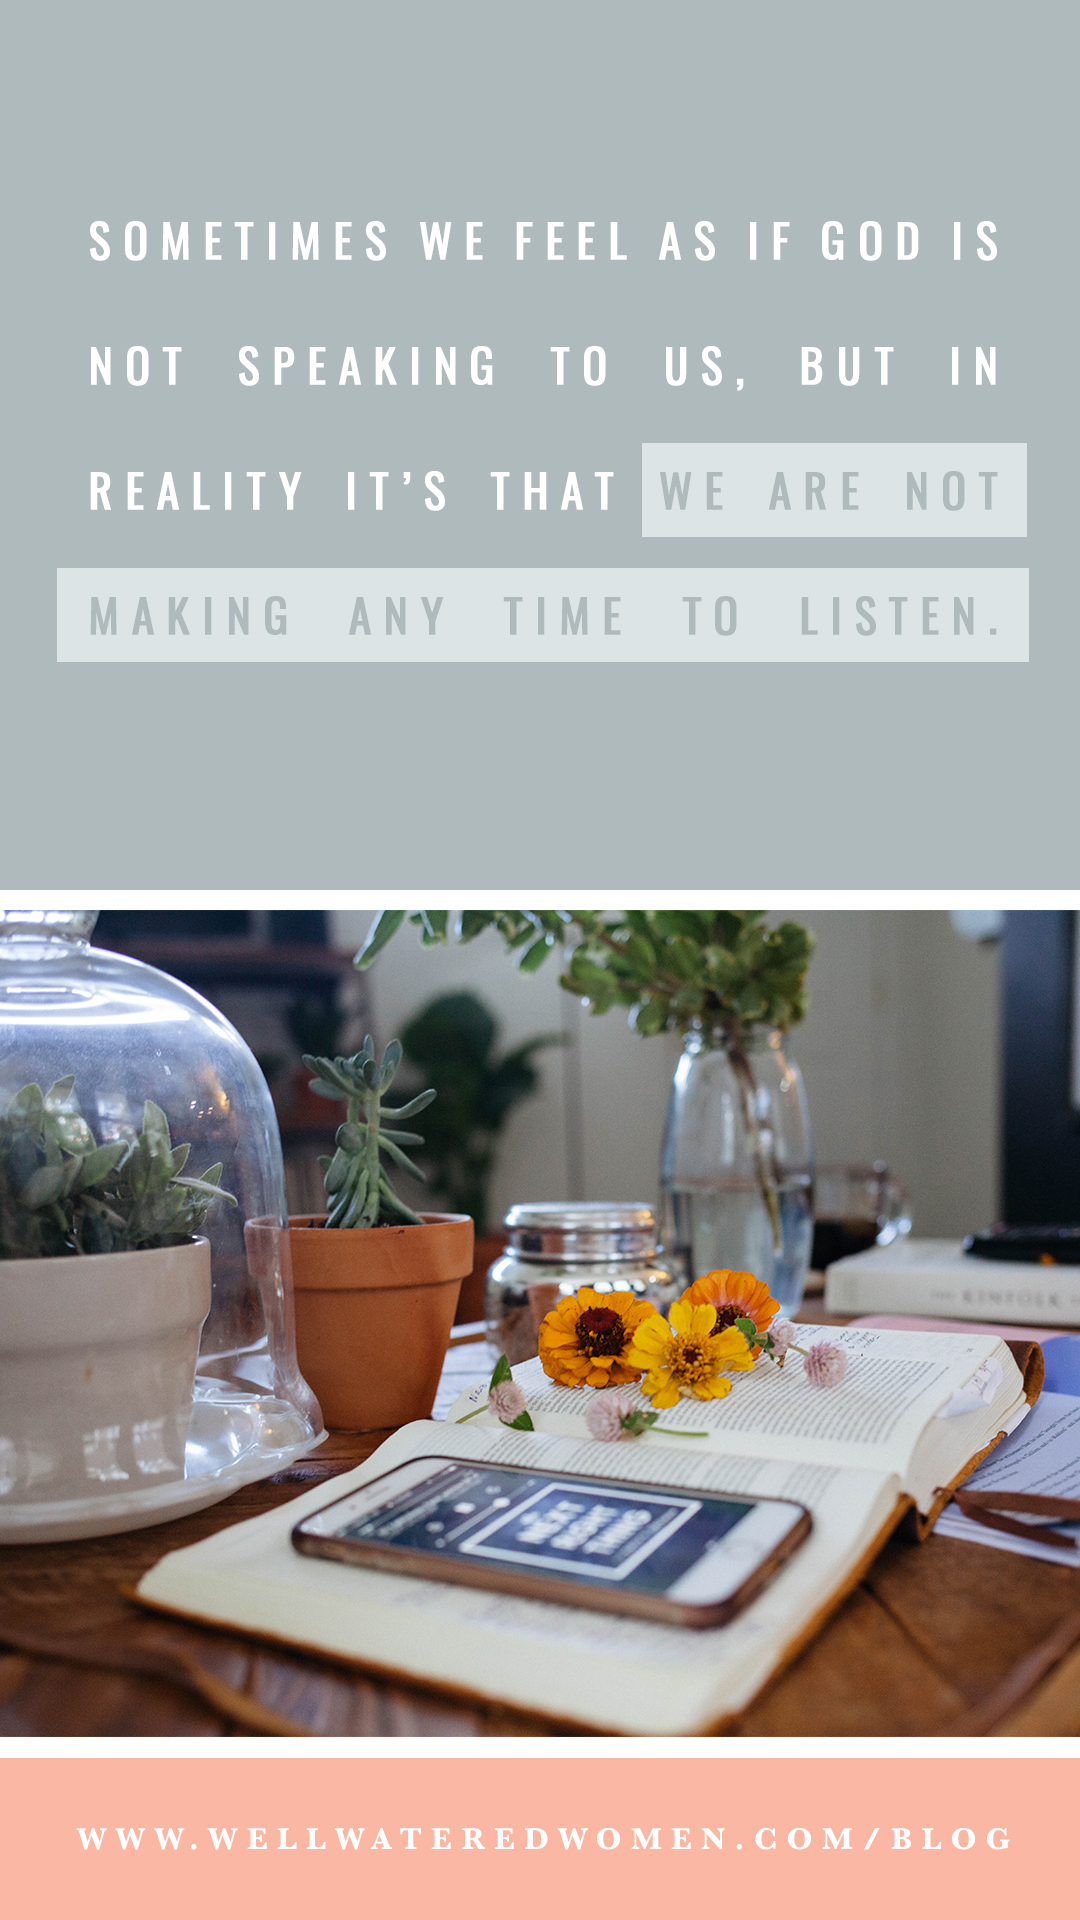 Sometimes we feel as if God is not speaking to us, but in reality it’s that we are not making any time to listen. Get still with Him today, ask Him what He has for you, and then be willing to actually listen to His answer and respond obediently.